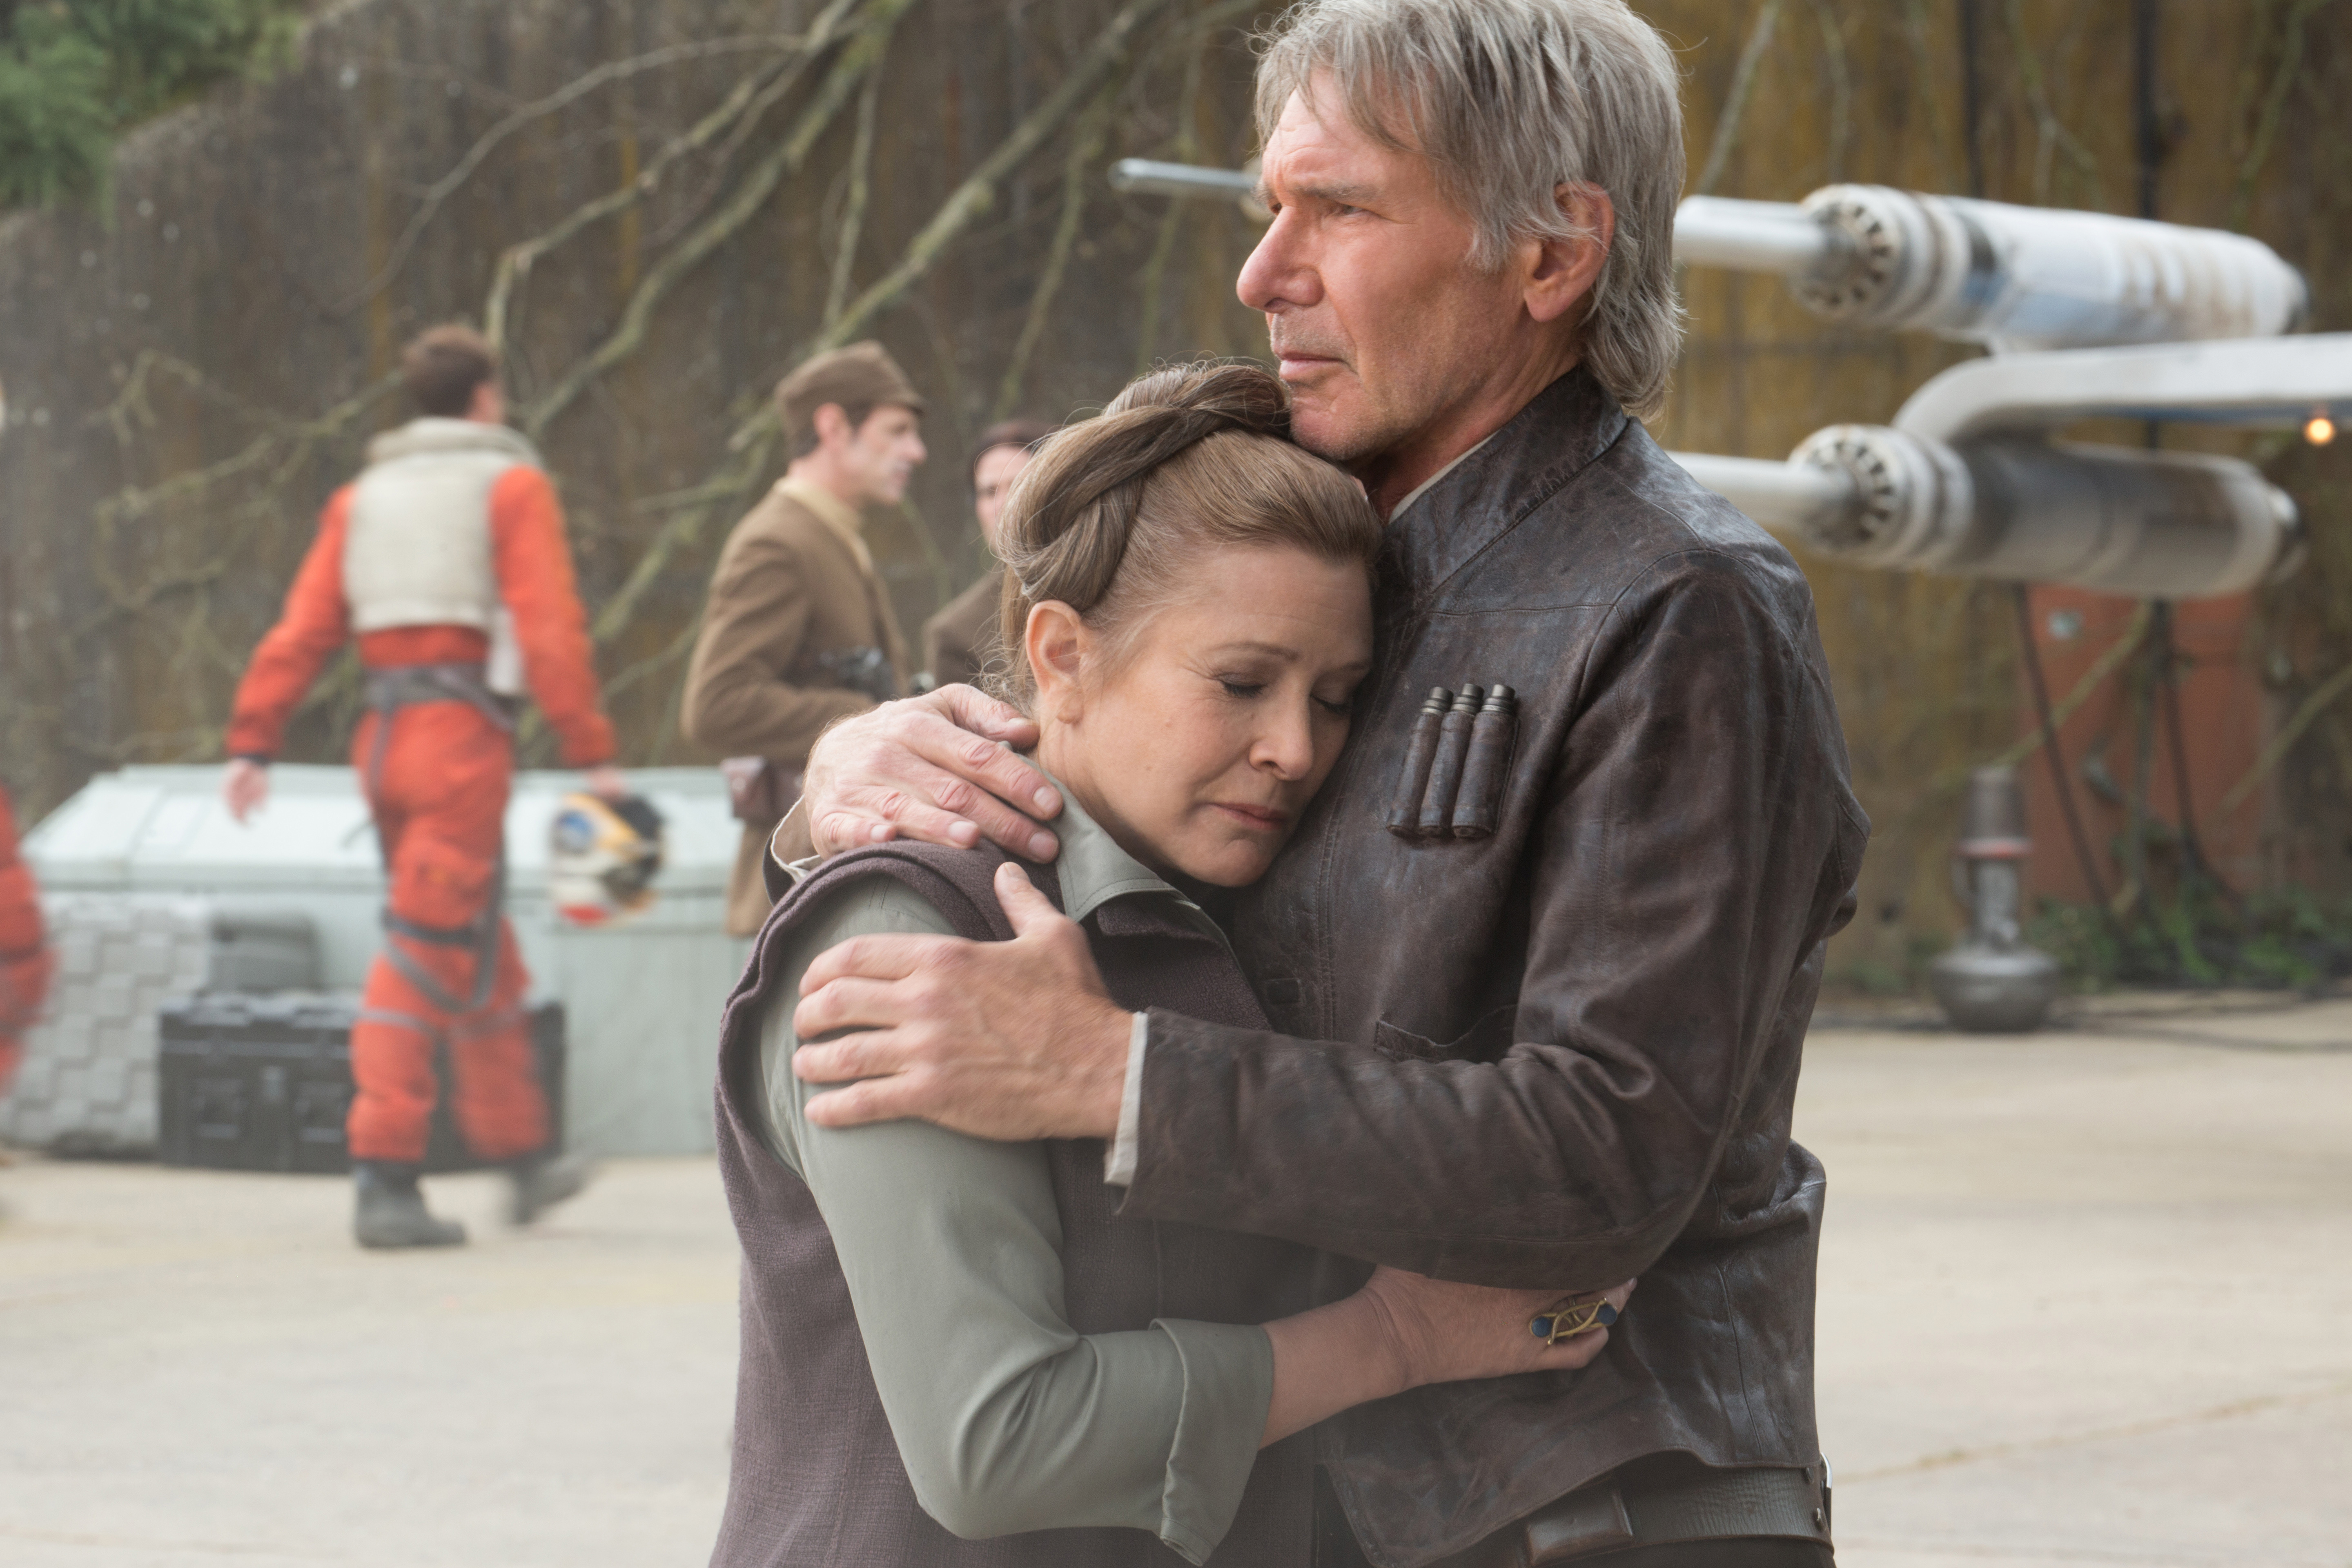 movie, star wars episode vii: the force awakens, carrie fisher, han solo, harrison ford, princess leia, star wars